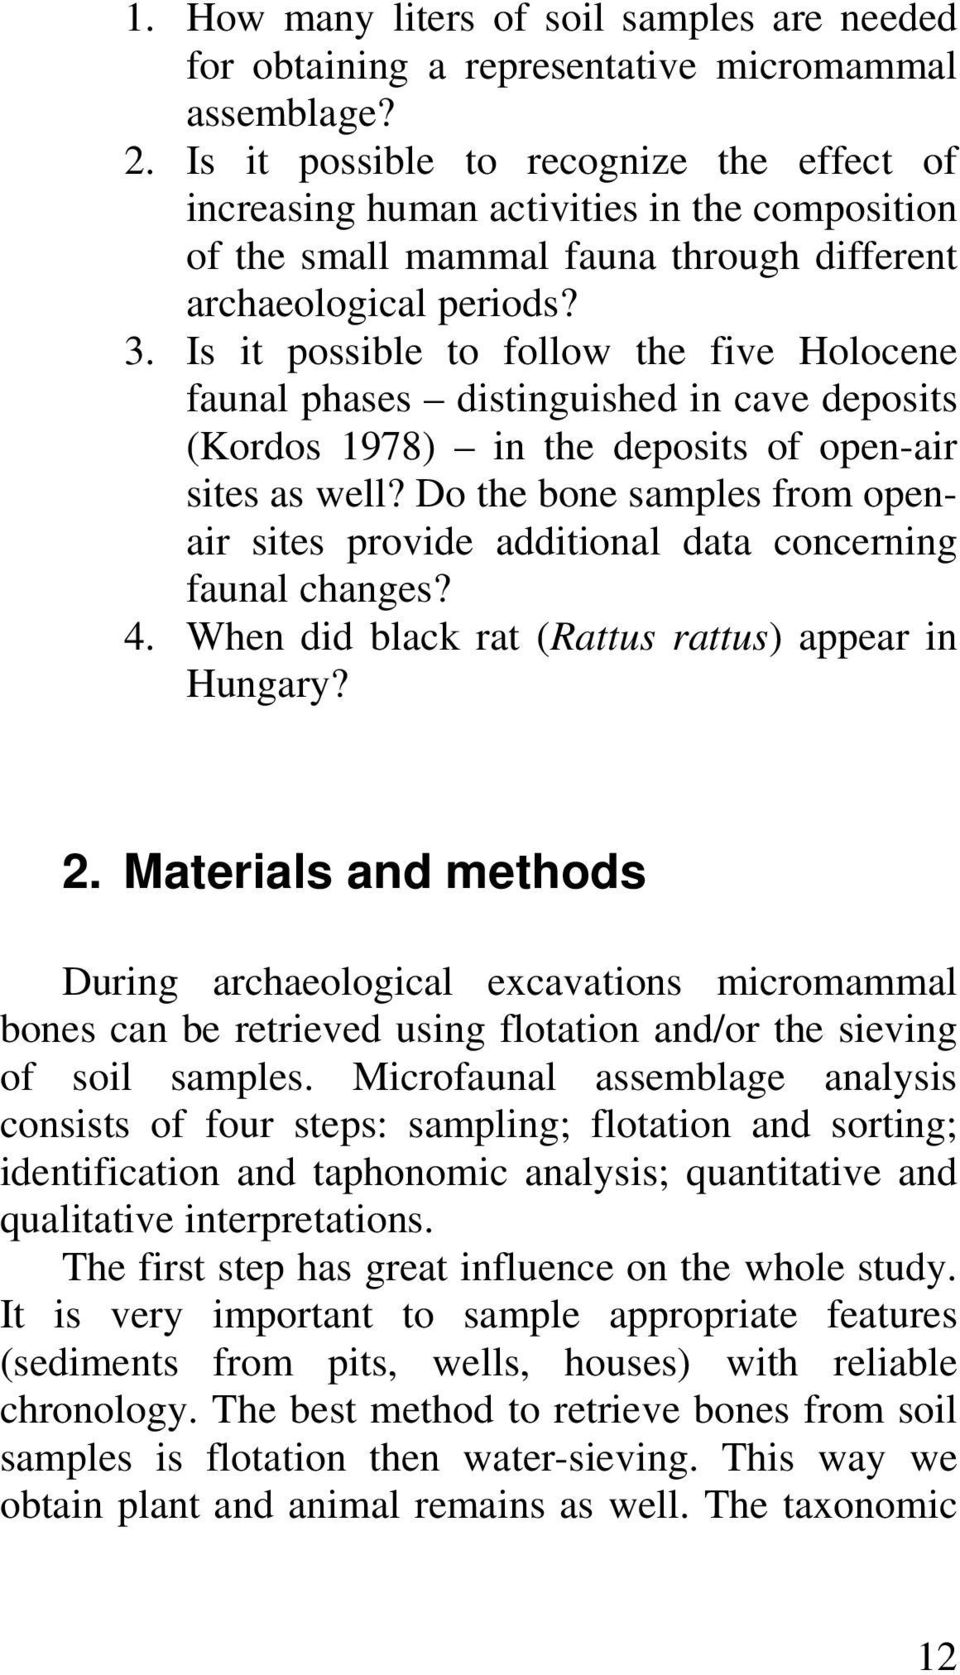 Is it possible to follow the five Holocene faunal phases distinguished in cave deposits (Kordos 1978) in the deposits of open-air sites as well?